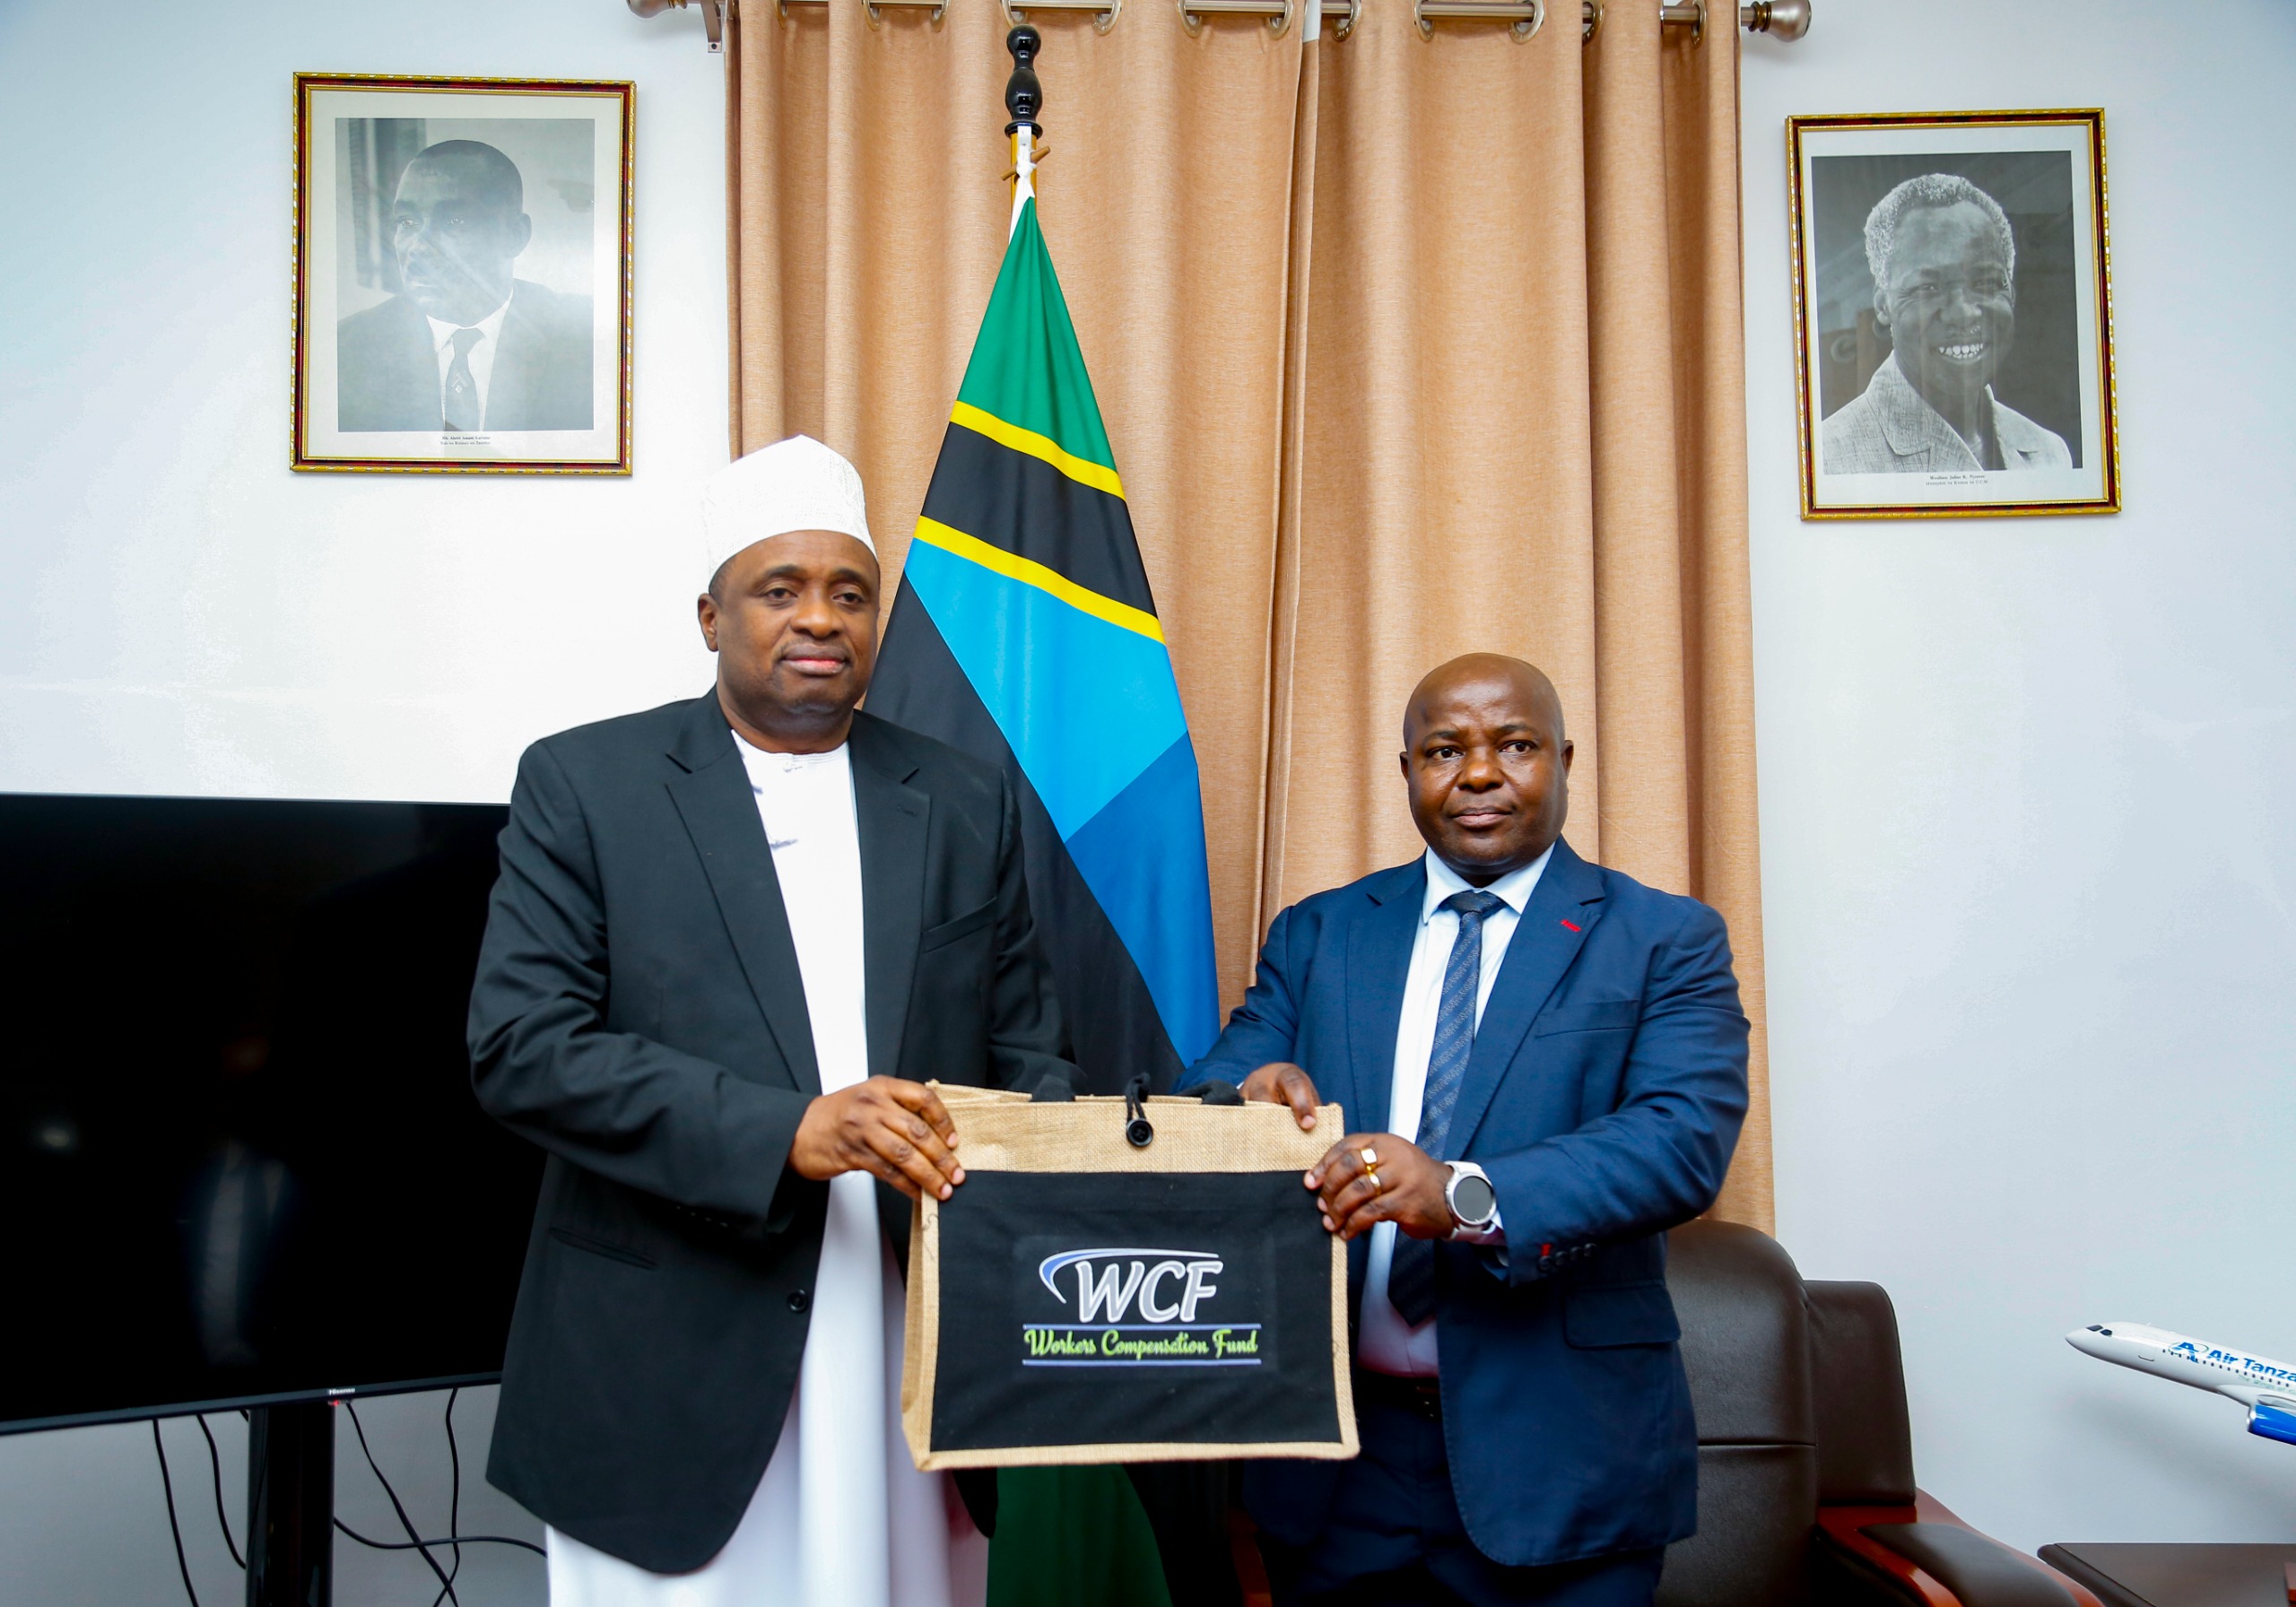 Zanzibar Second Vice President Hemed Suleiman Abdulla (L) receives documents from Workers Compensation Fund director general Dr John Mduma in Zanzibar yesterday shortly after witnessing the signing of an MoU on cooperation between WCF and the ZSSF.